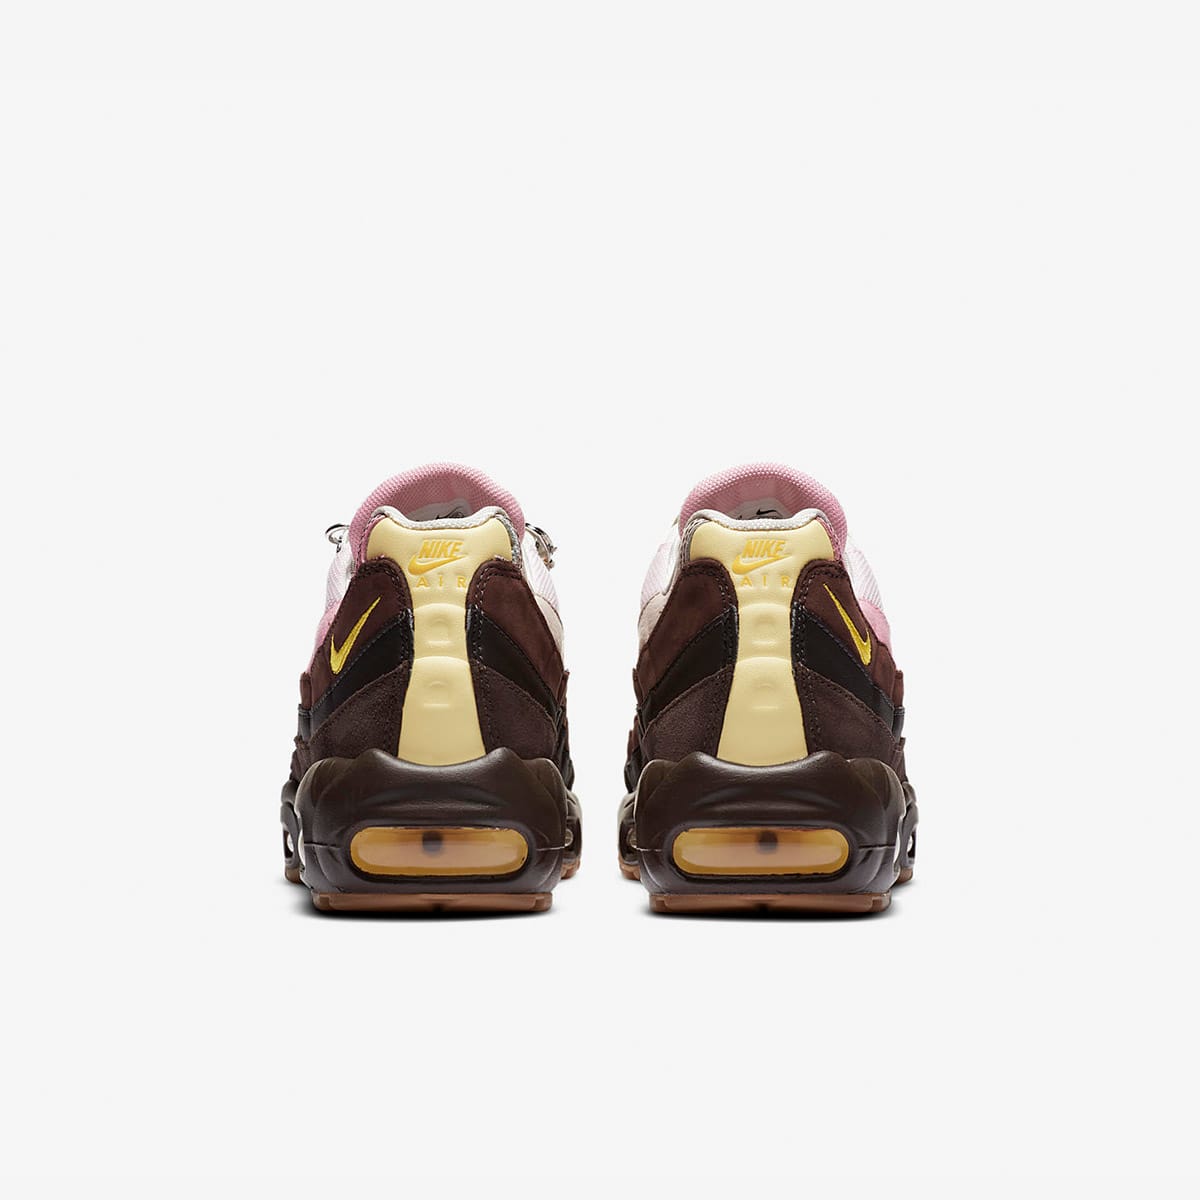 Nike Air Max 95 W (Earth & Opti Yellow) | END. Launches